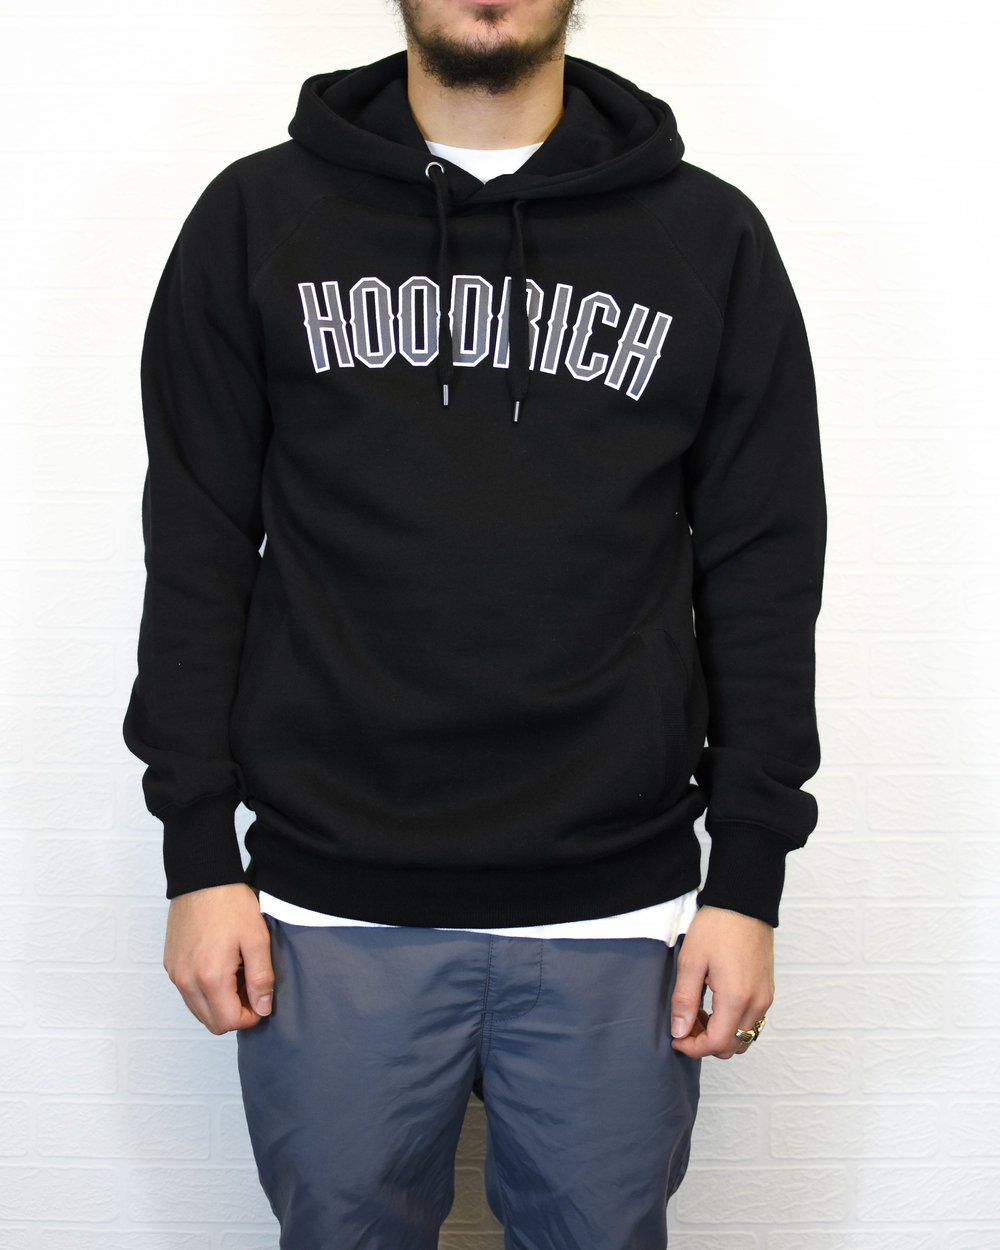 LFashionC - London Fashion Cat: Four Amazing and Exclusive Hoodies by ...